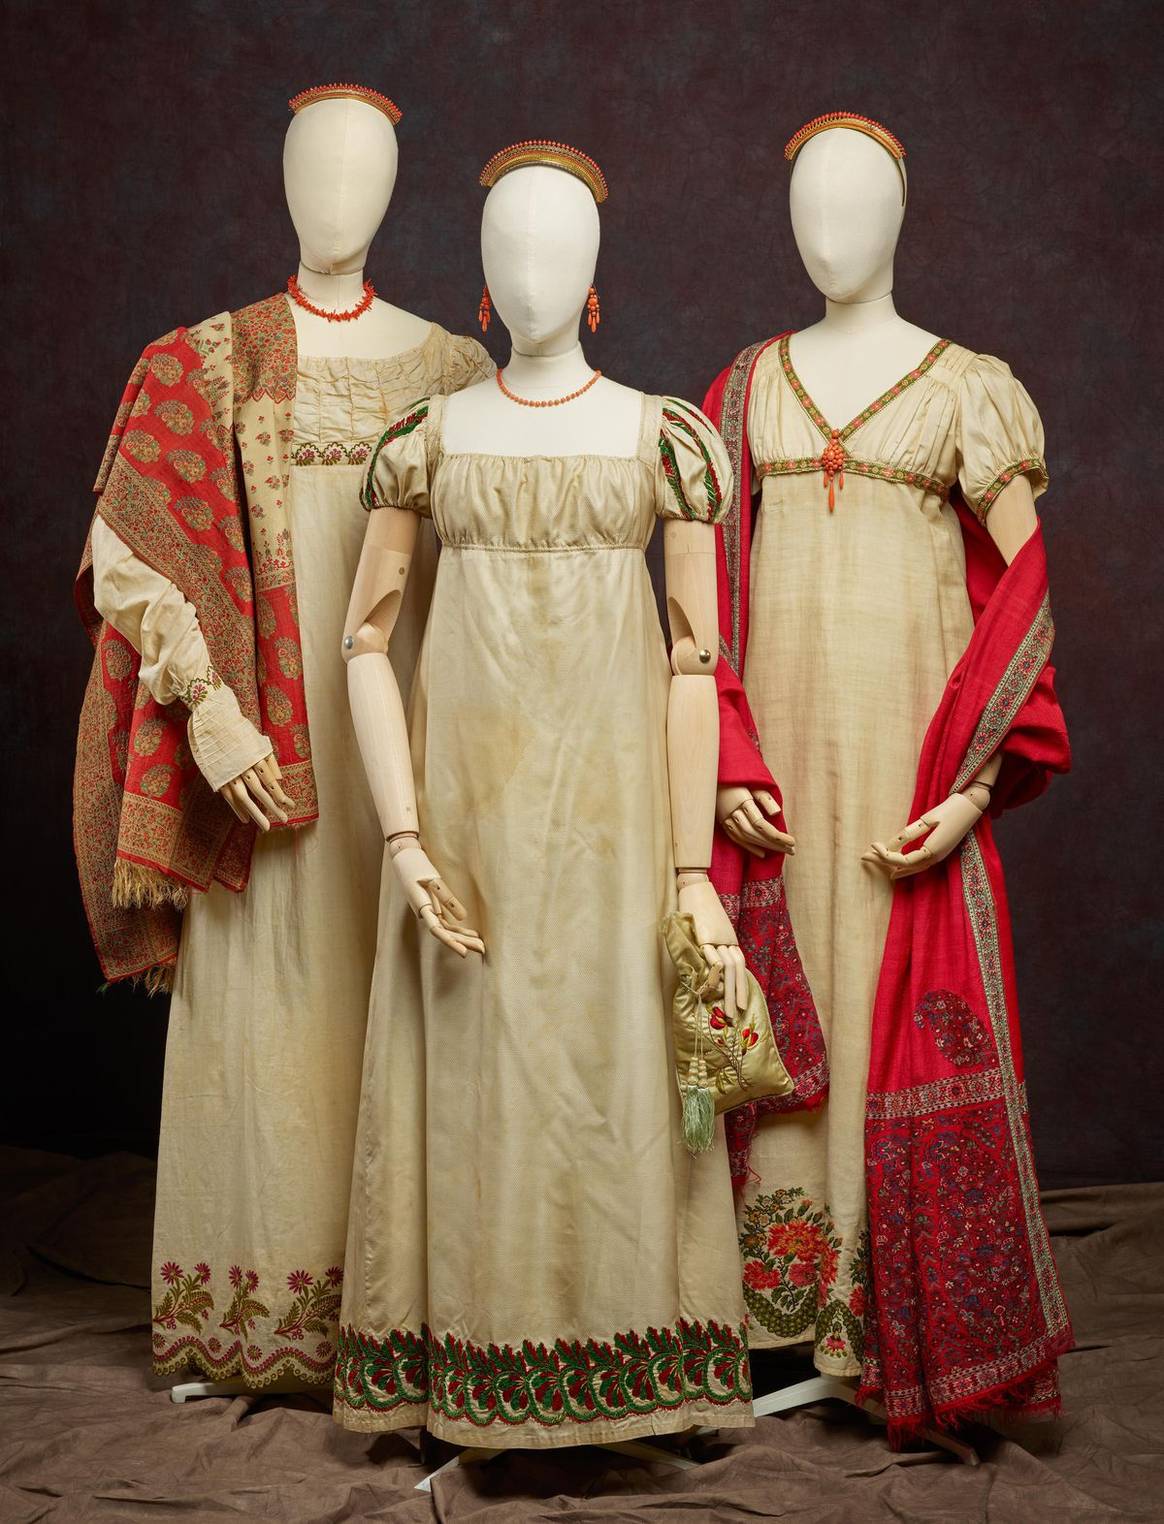 Empire dresses with embroidery in buta
motifs (derived from the Kashmir scarf fashion) and Kashmir shawls with
buta motifs. The Kashmir scarf originally comes from India, first quarter
of the 19th century, Kunstmuseum Den Haag. Photo: Alice de
Groot.